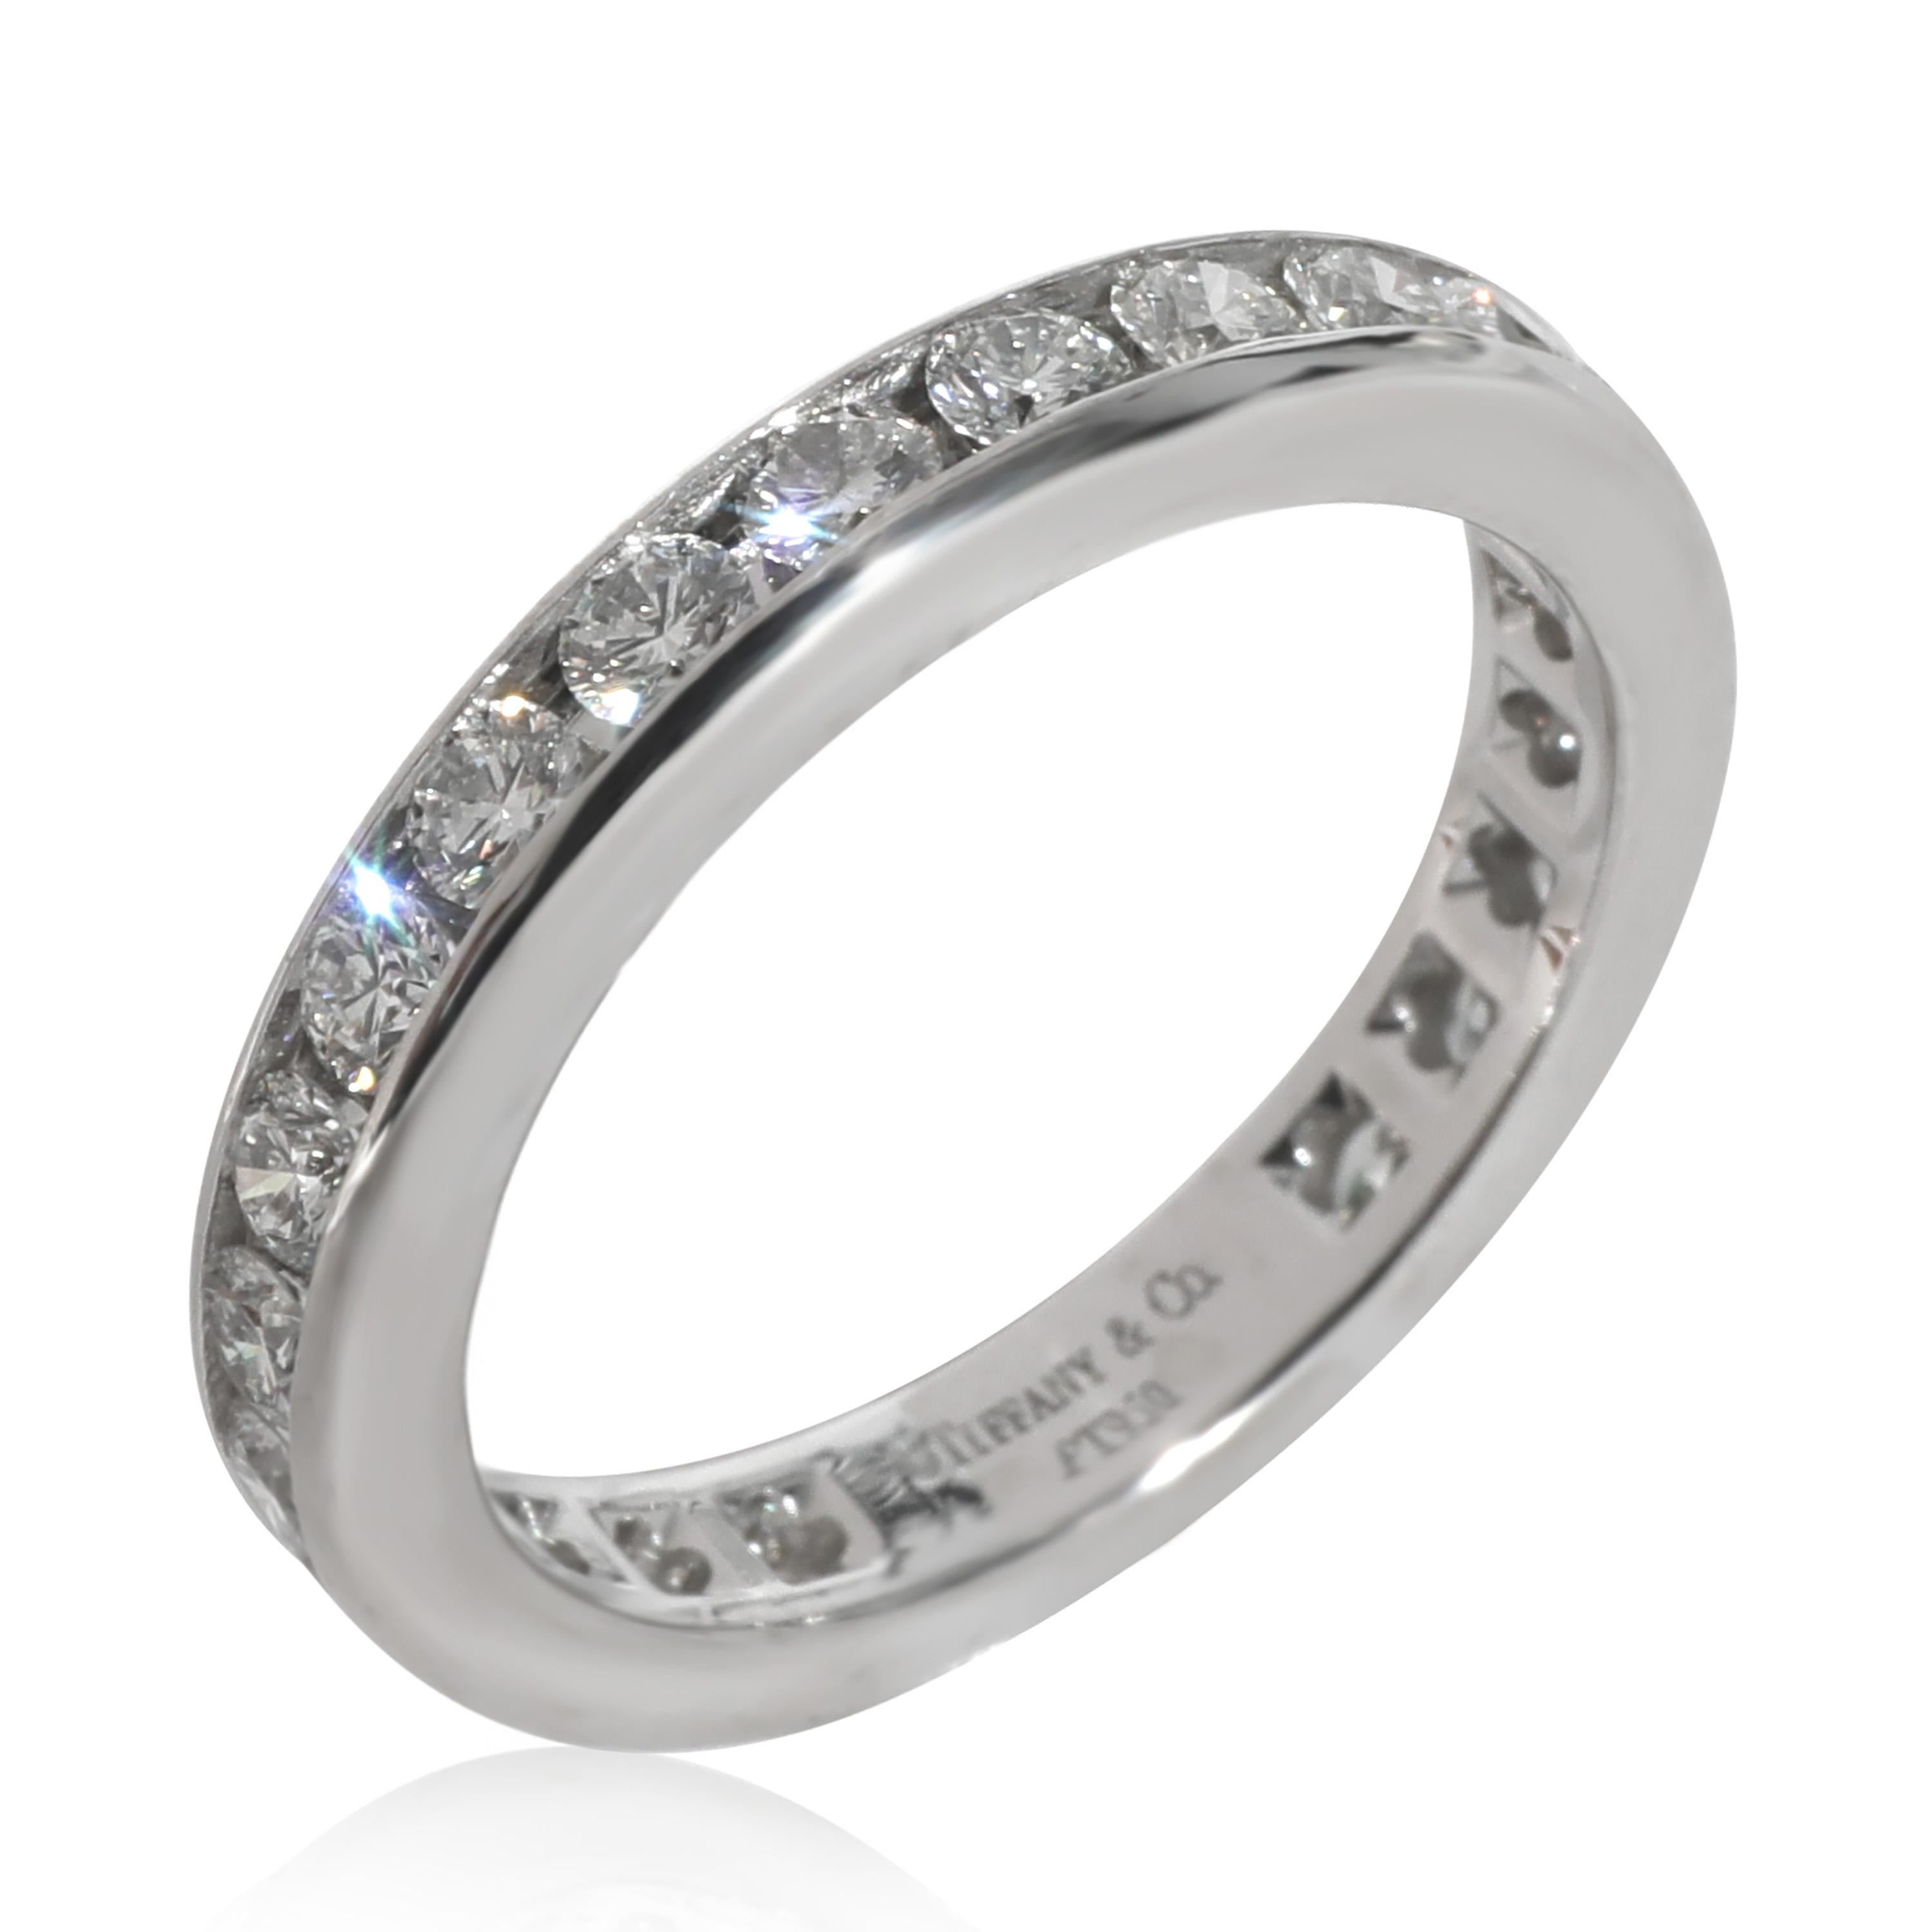 Tiffany & Co. Channel Set Diamond Eternity Band in Platinum 1.00 CTW

PRIMARY DETAILS
SKU: 130587
Listing Title: Tiffany & Co. Channel Set Diamond Eternity Band in Platinum 1.00 CTW
Condition Description: Tiffany reinvents a classic with the Return